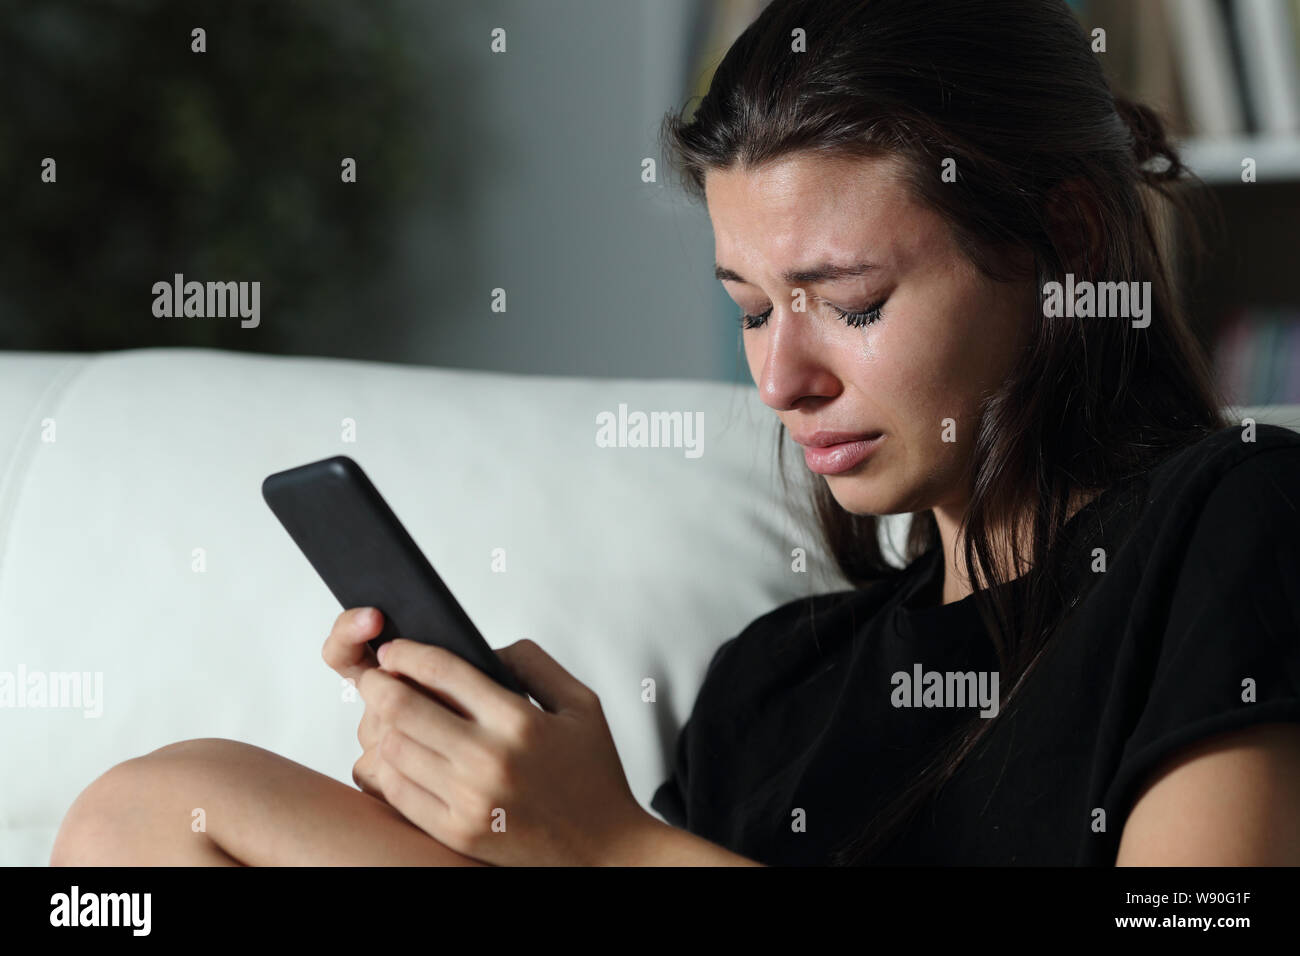 Sad teen crying after read smart phone message sitting on a couch in the dark at home Stock Photo